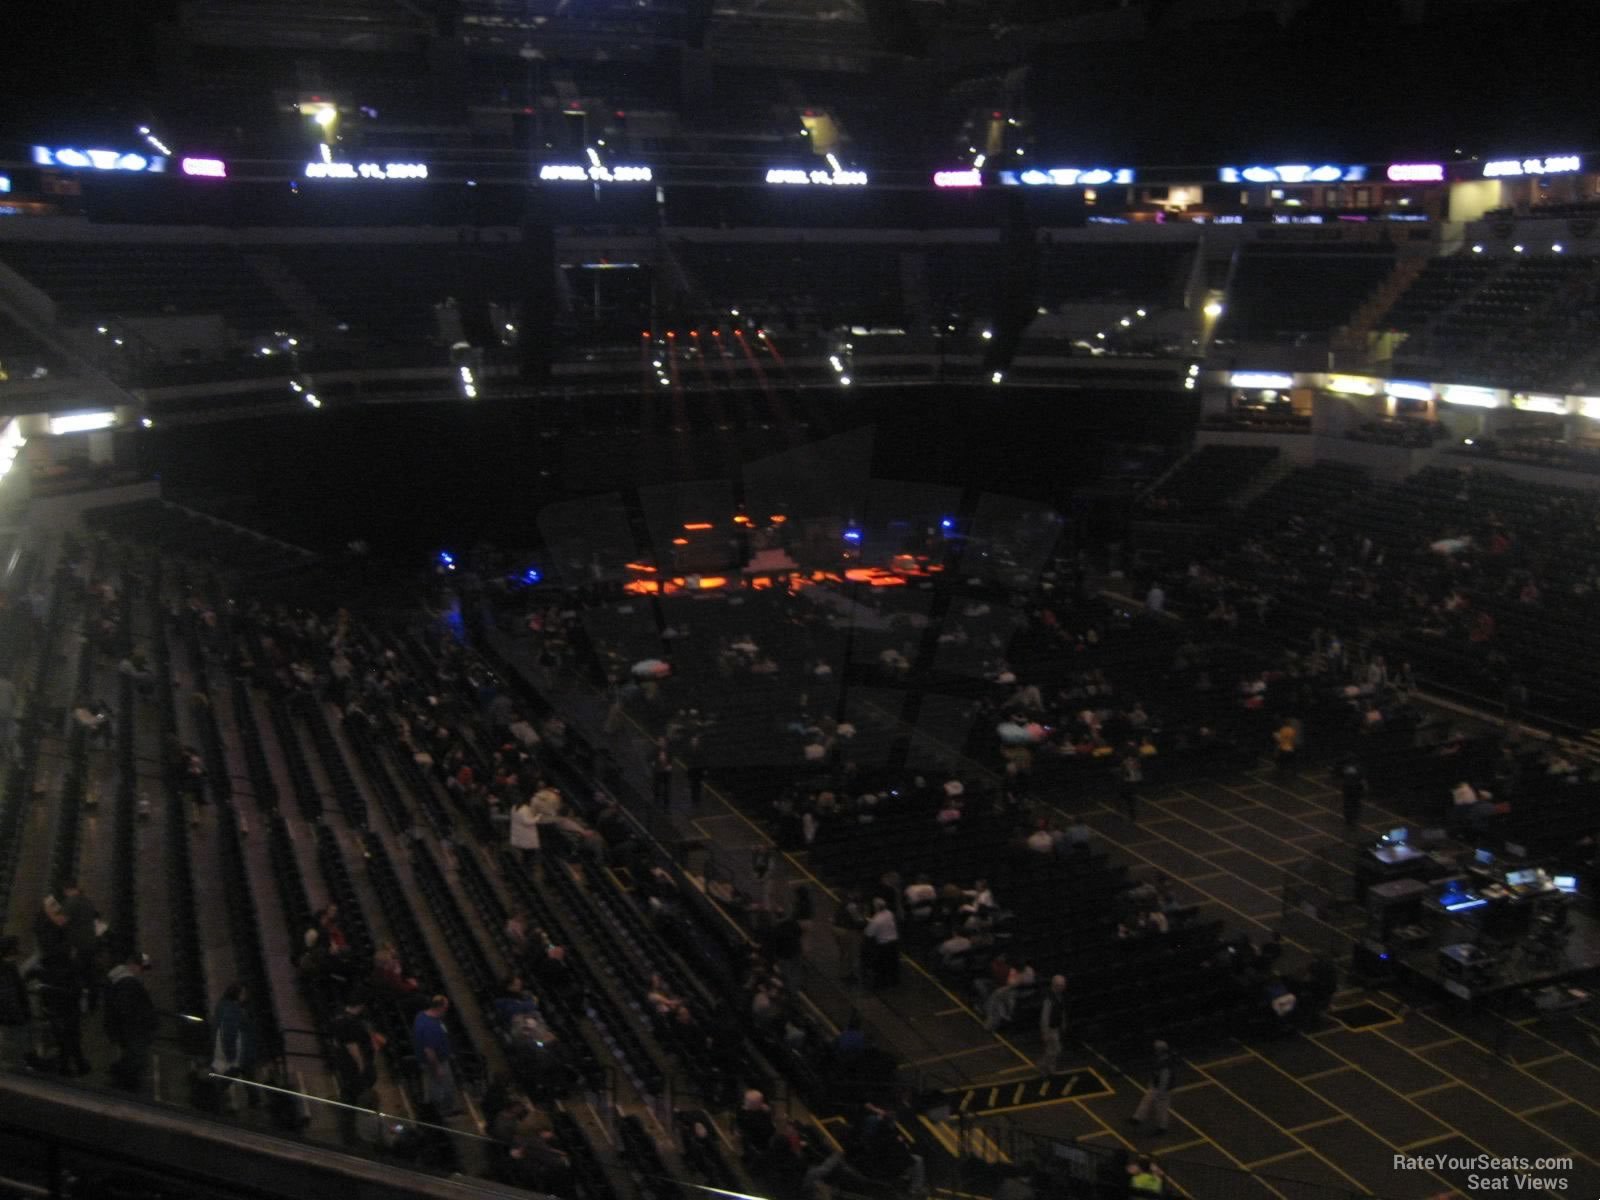 Bankers Life Fieldhouse Seating Chart View